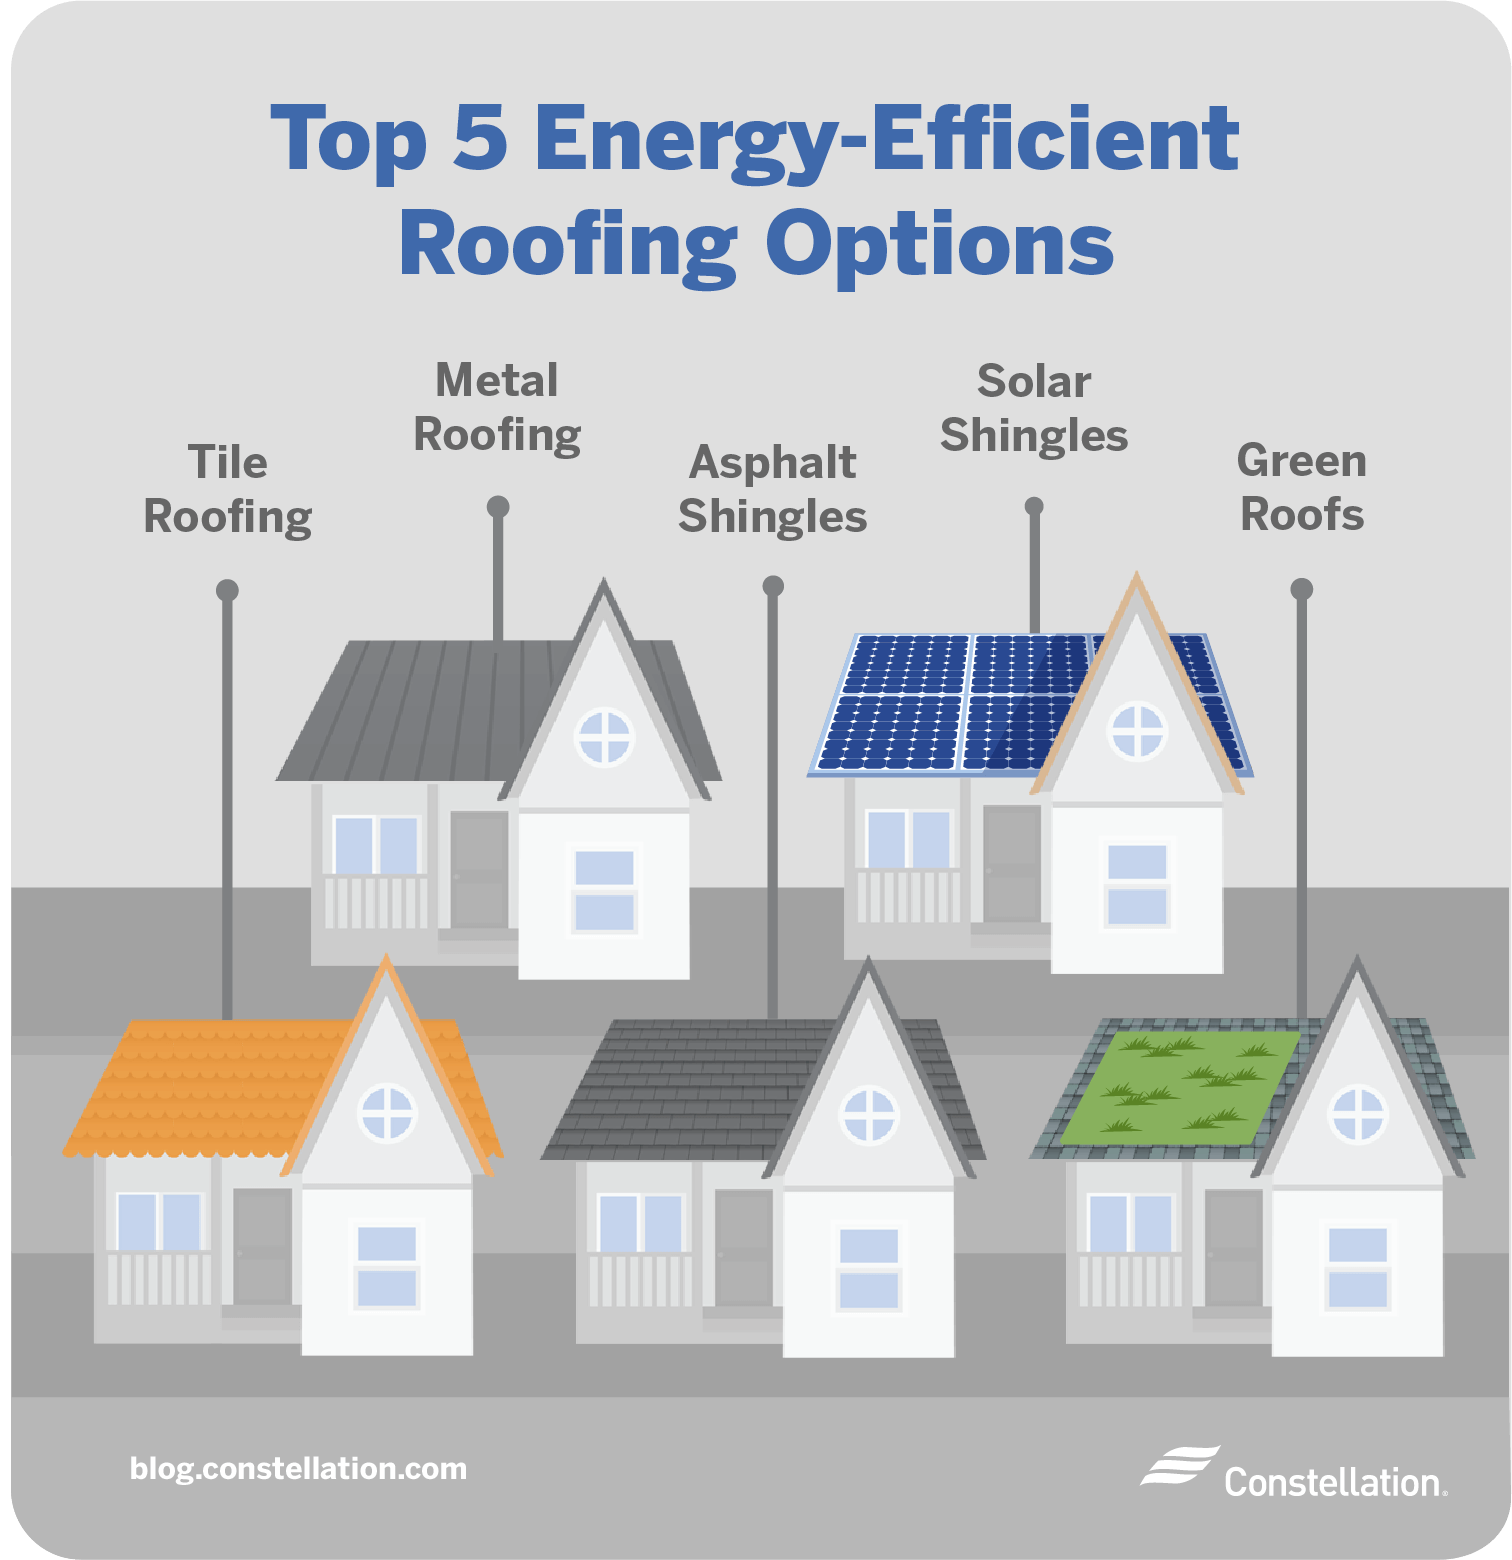 Energy efficient roofing options.